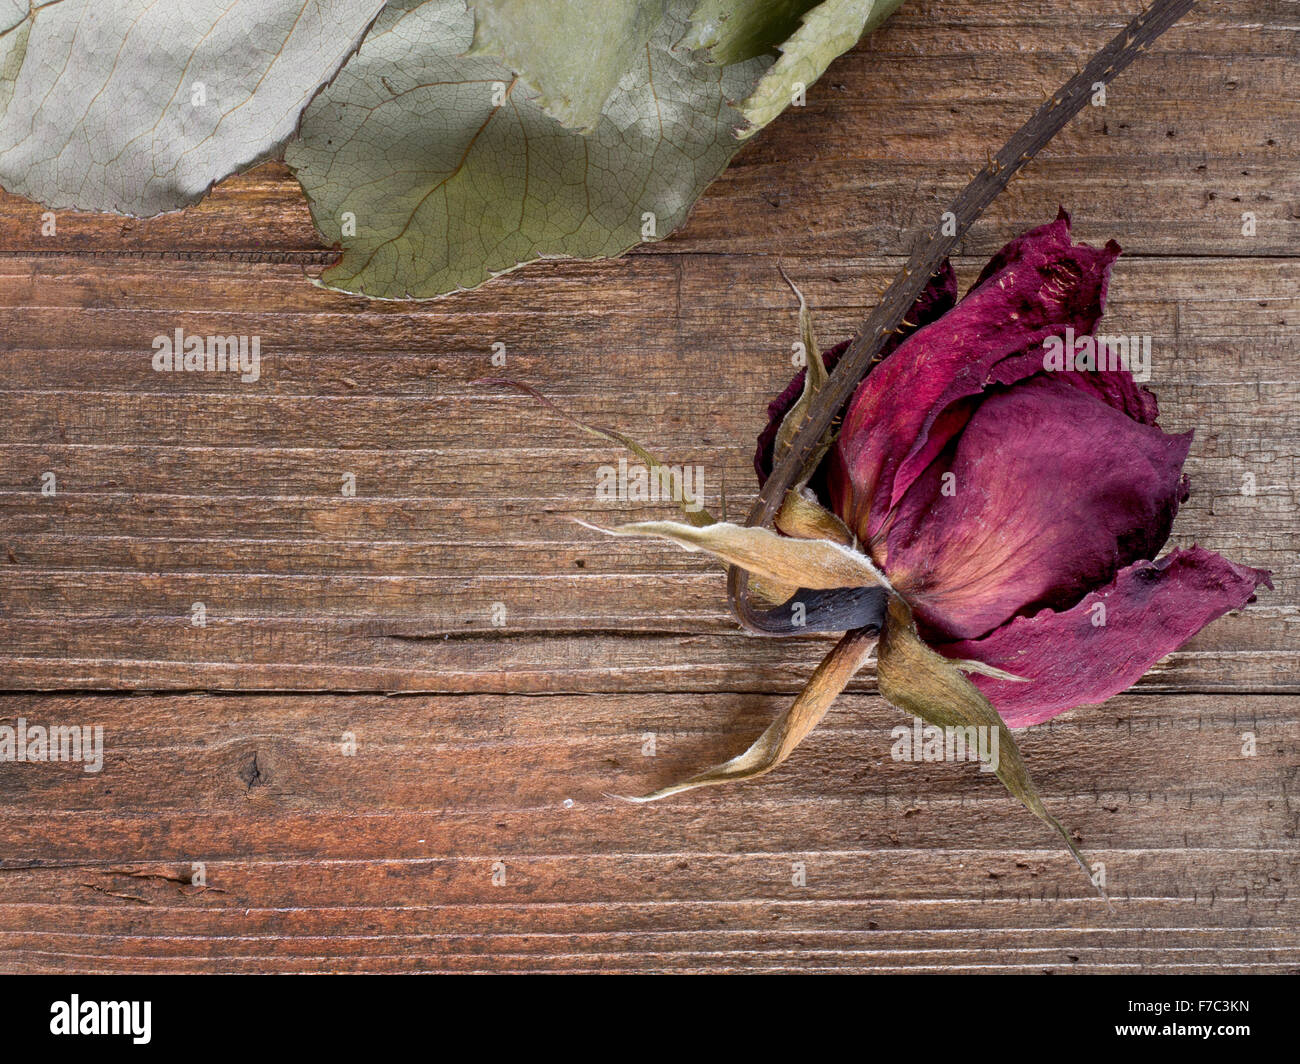 Red rose, now dead, on rustic wooden background. Stock Photo